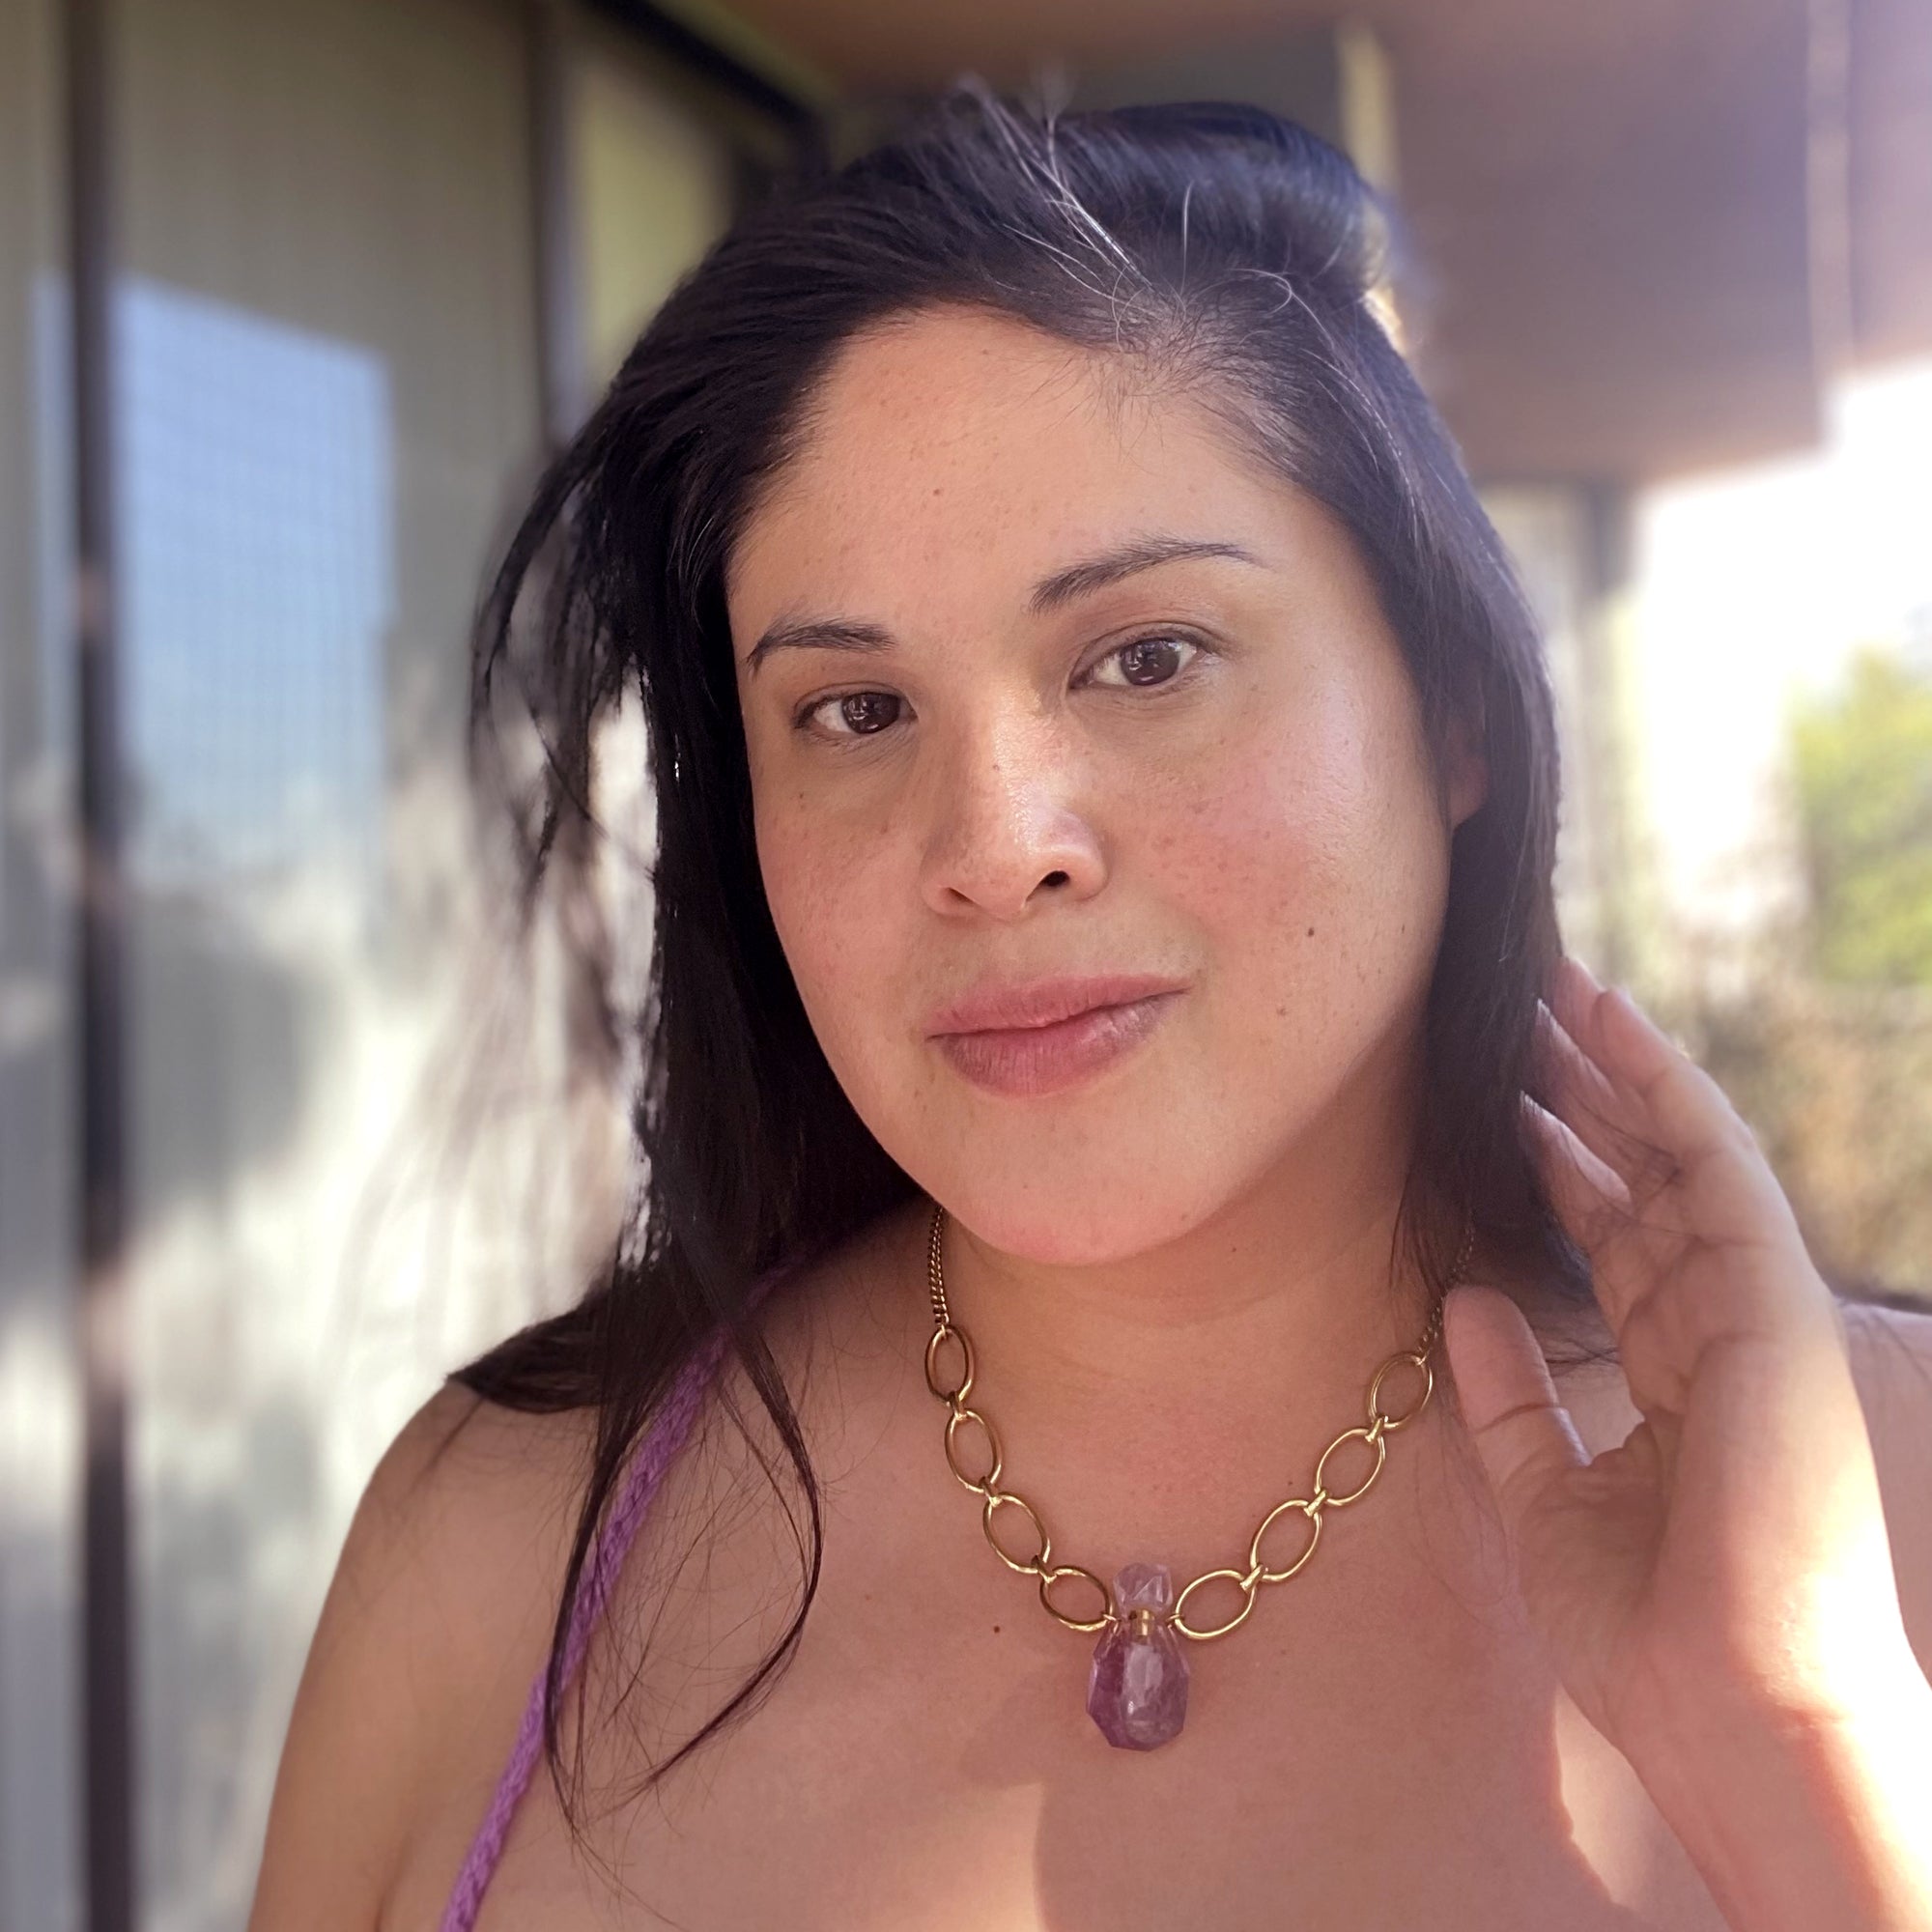 Jenny Dayco wearing an amethyst vial necklace